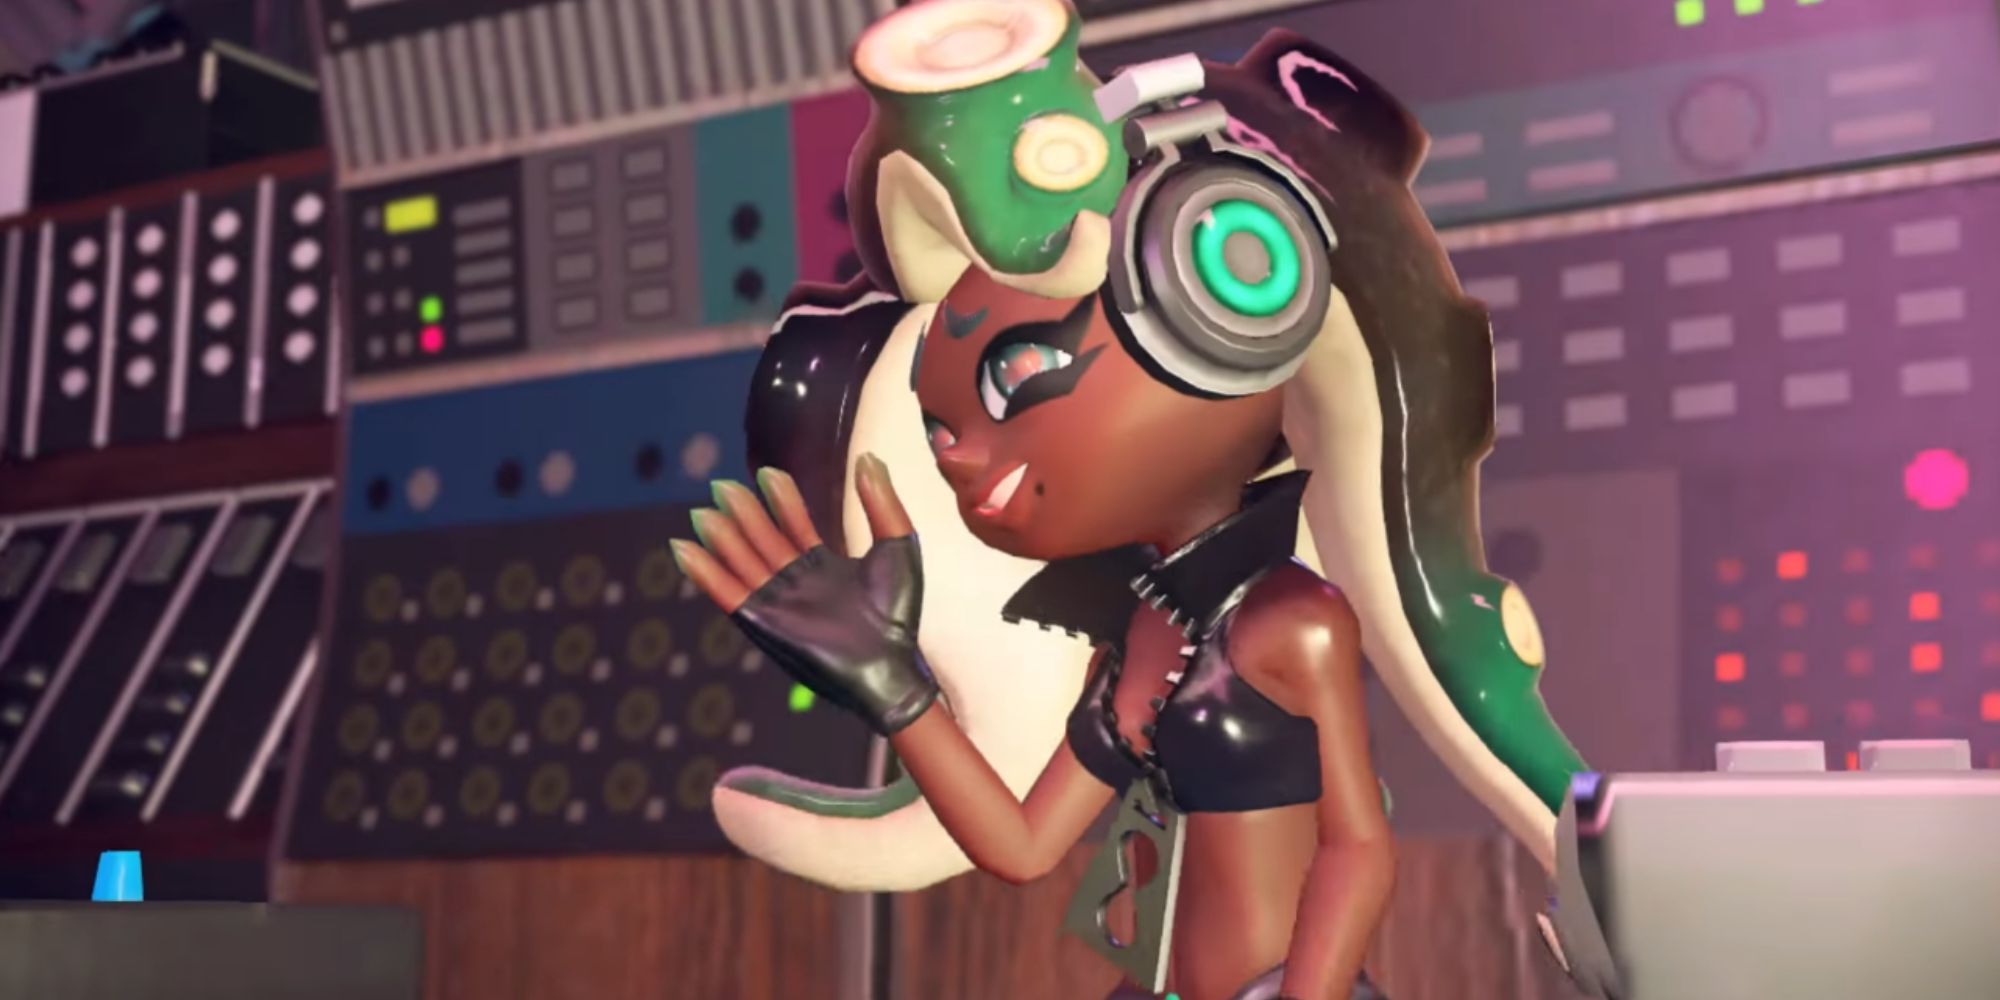 Marina waves to the crowd during a Splatfest